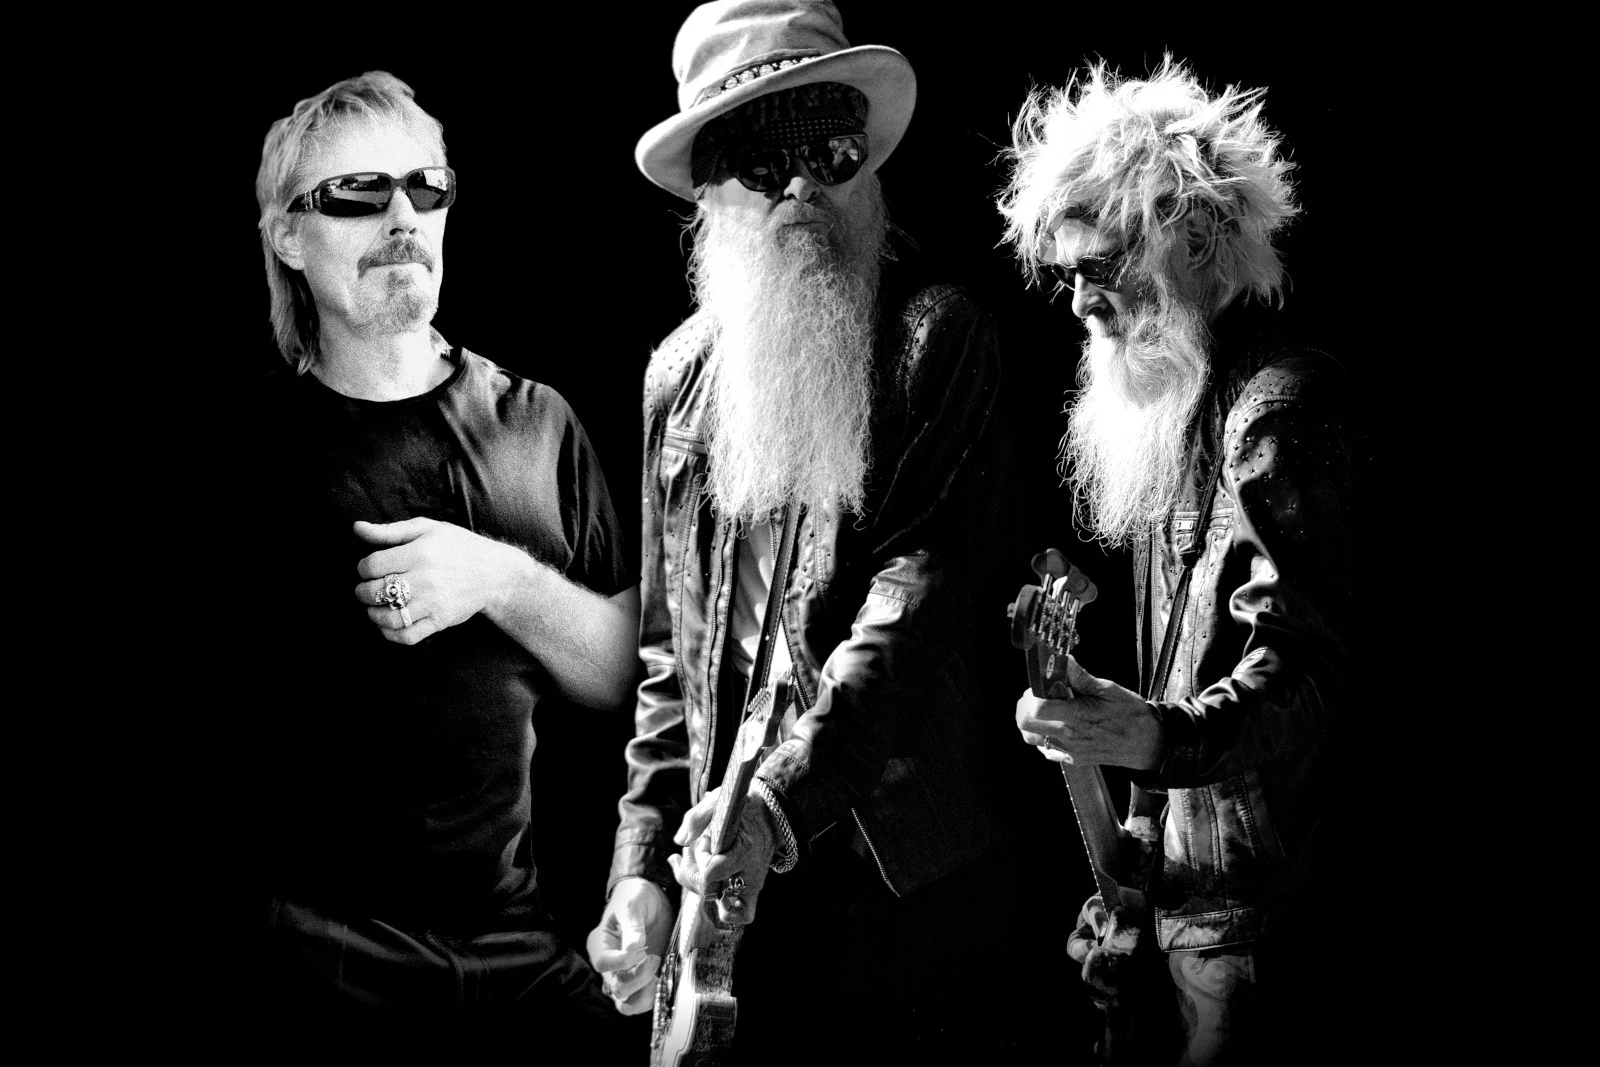 50 Years Ago: ZZ Top Pilfer 'Francine' for First Charting Song